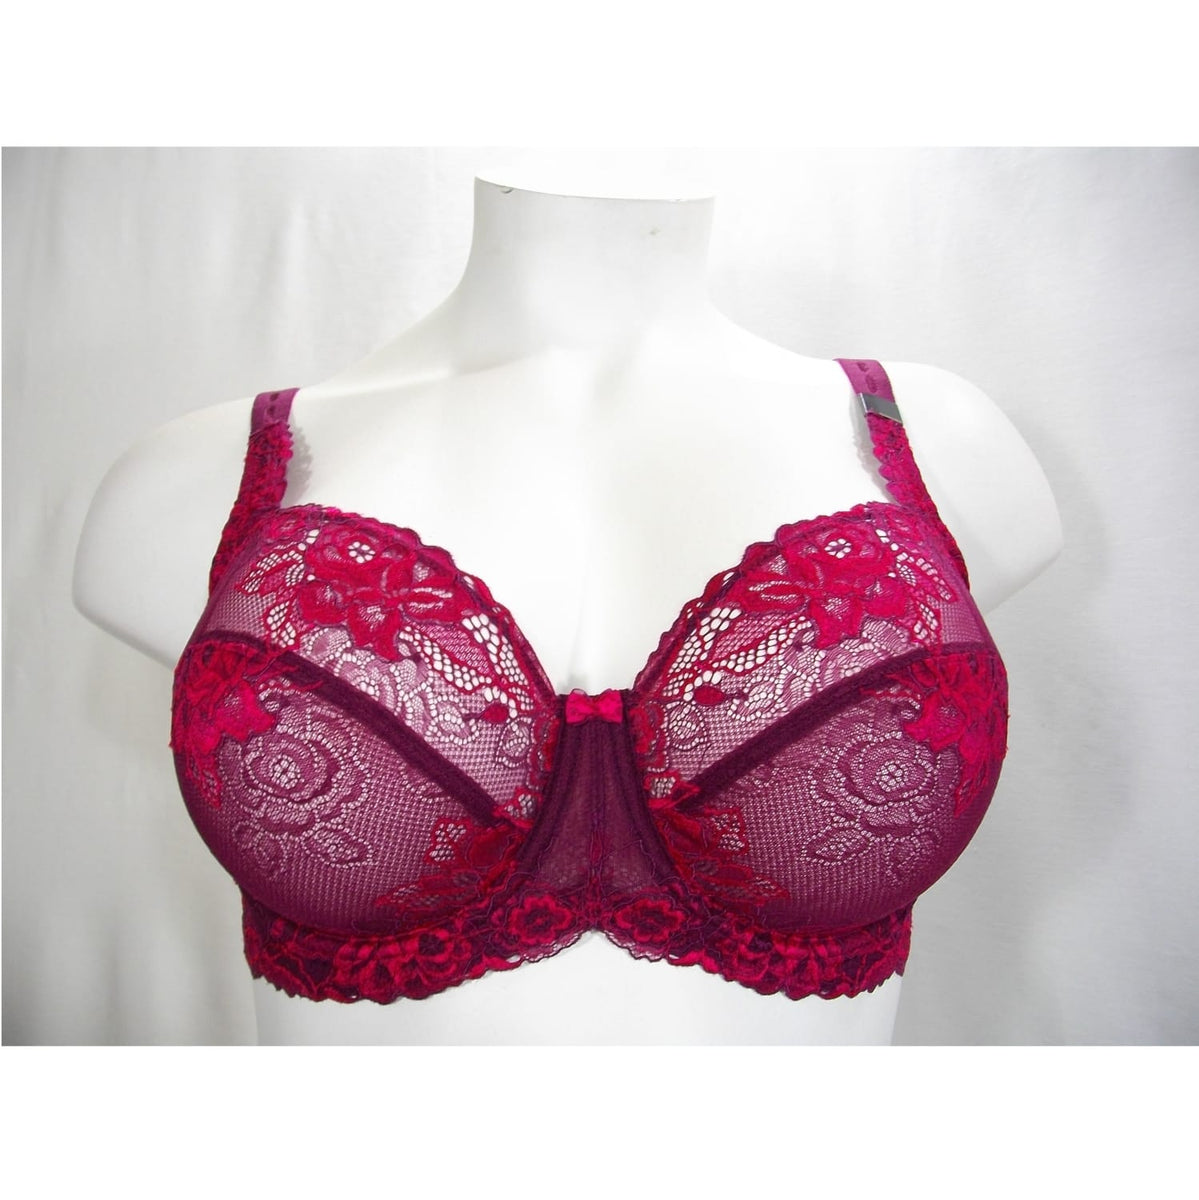 Paramour 115005 by Felina Captivate Unpadded 3 Part Cup